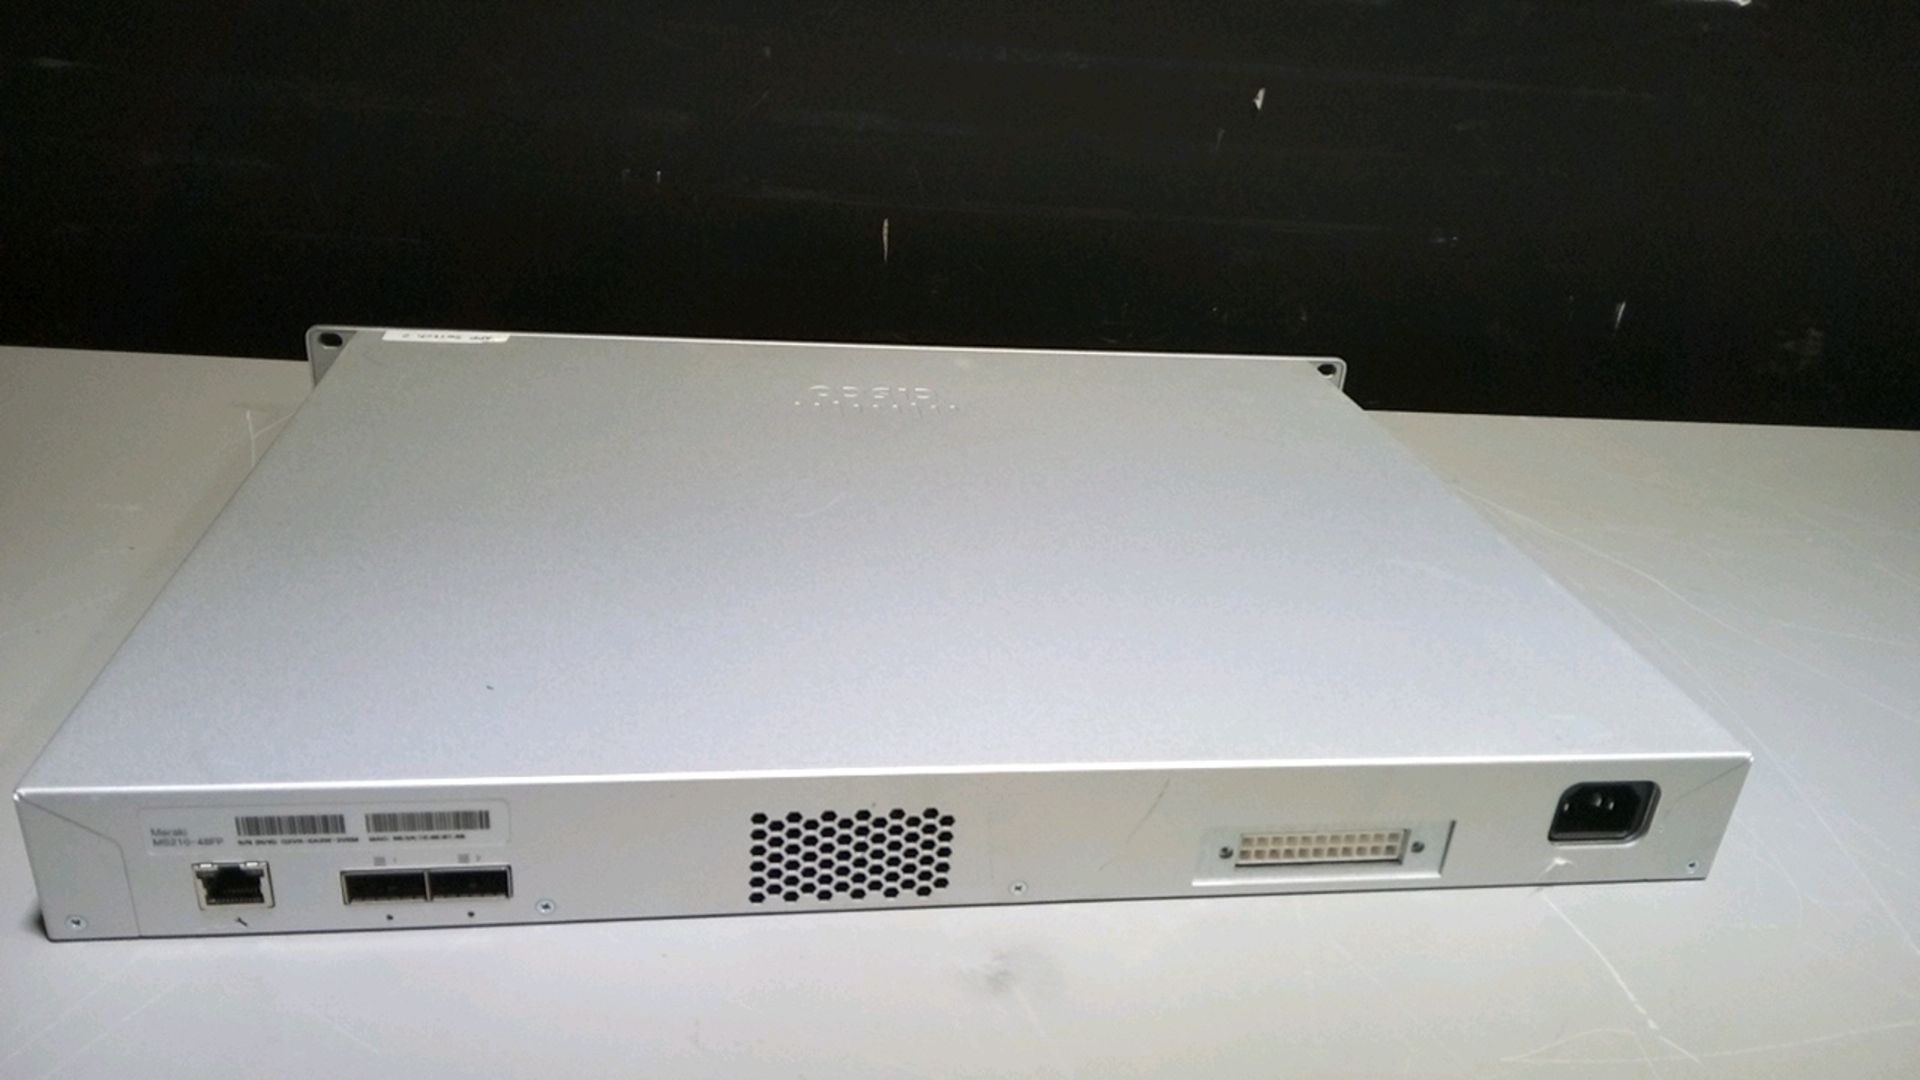 CISCO SYSTEMS MERAKI M210-48FP SWITCH LOCATED AT: 2440 GREENLEAF AVE, ELK GROVE VILLAGE IL - Image 2 of 2